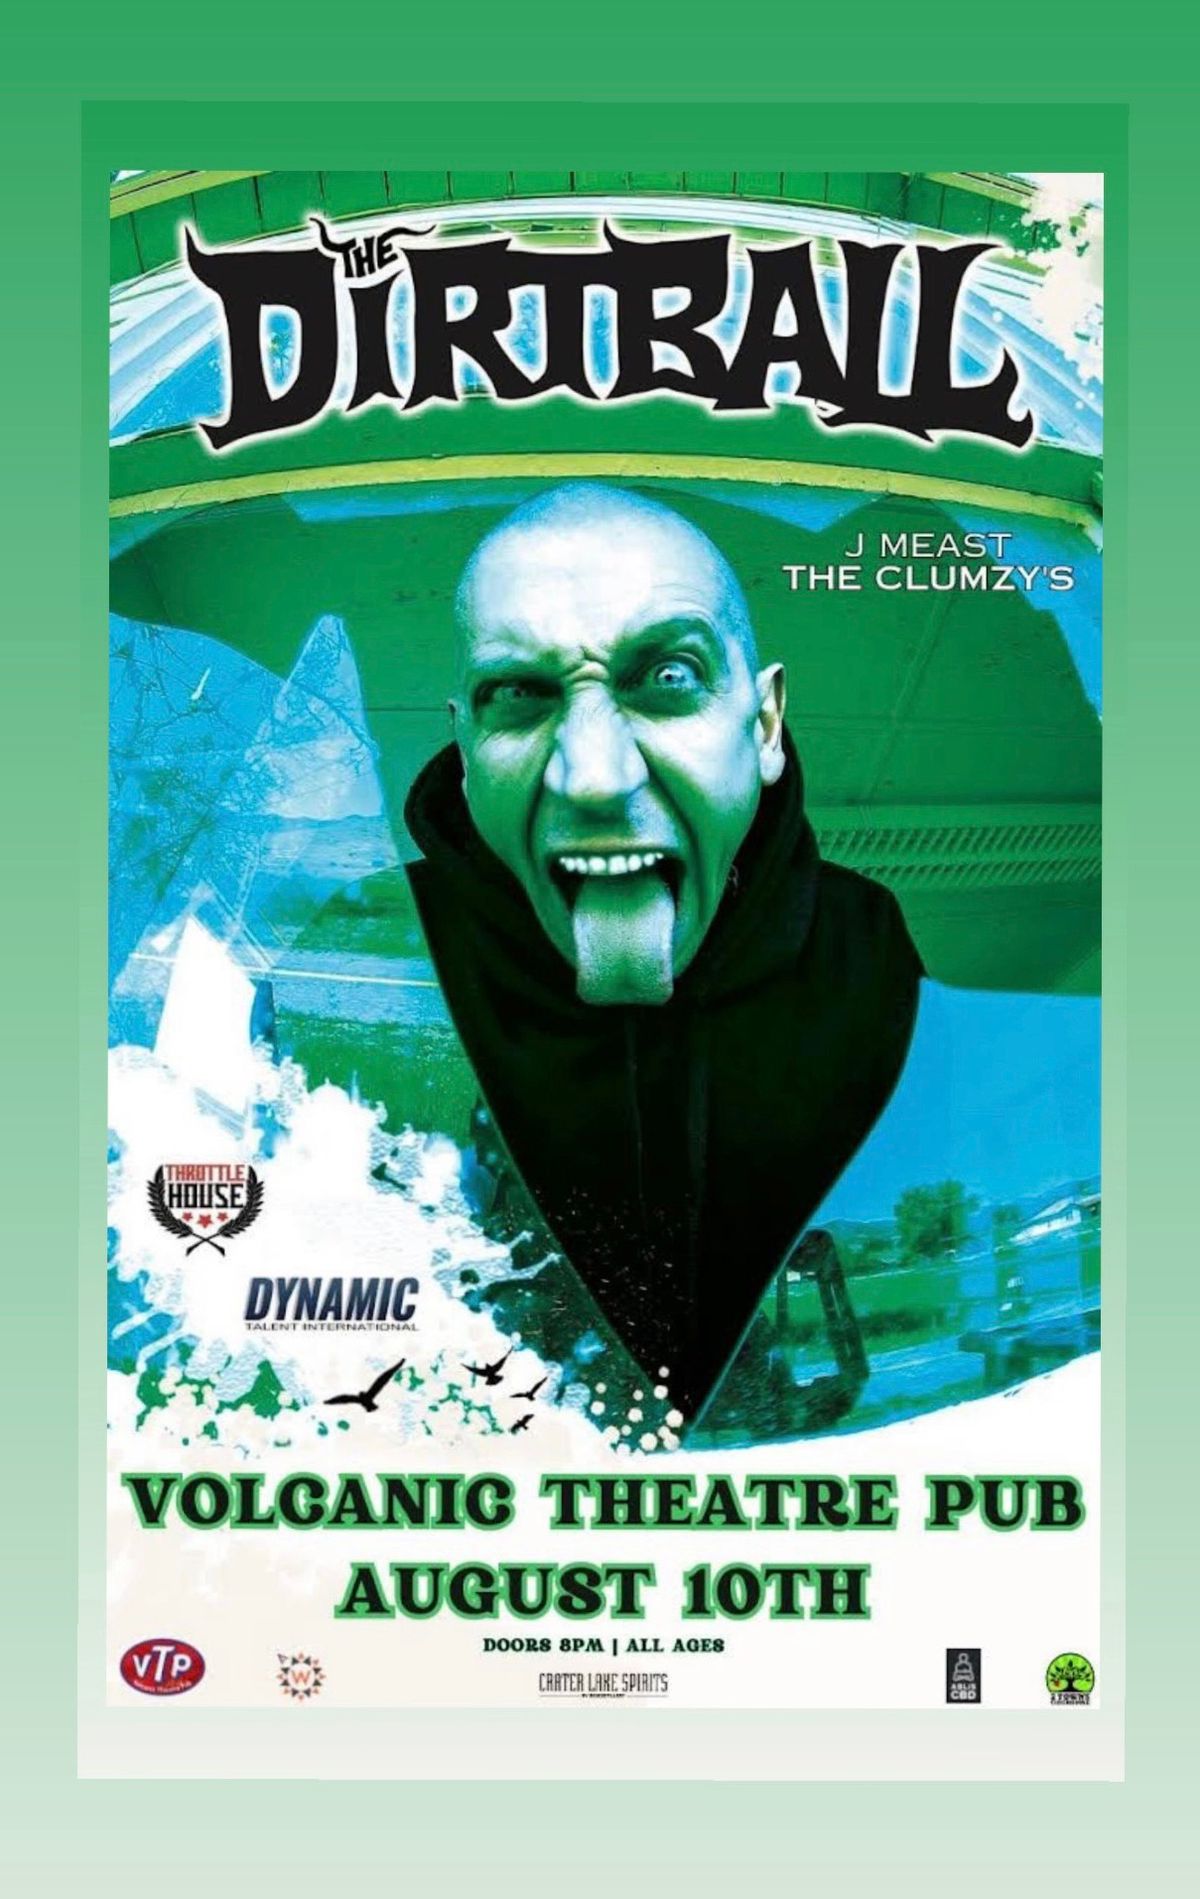 The Dirtball at Volcanic Theatre Pub in Bend, OR!!